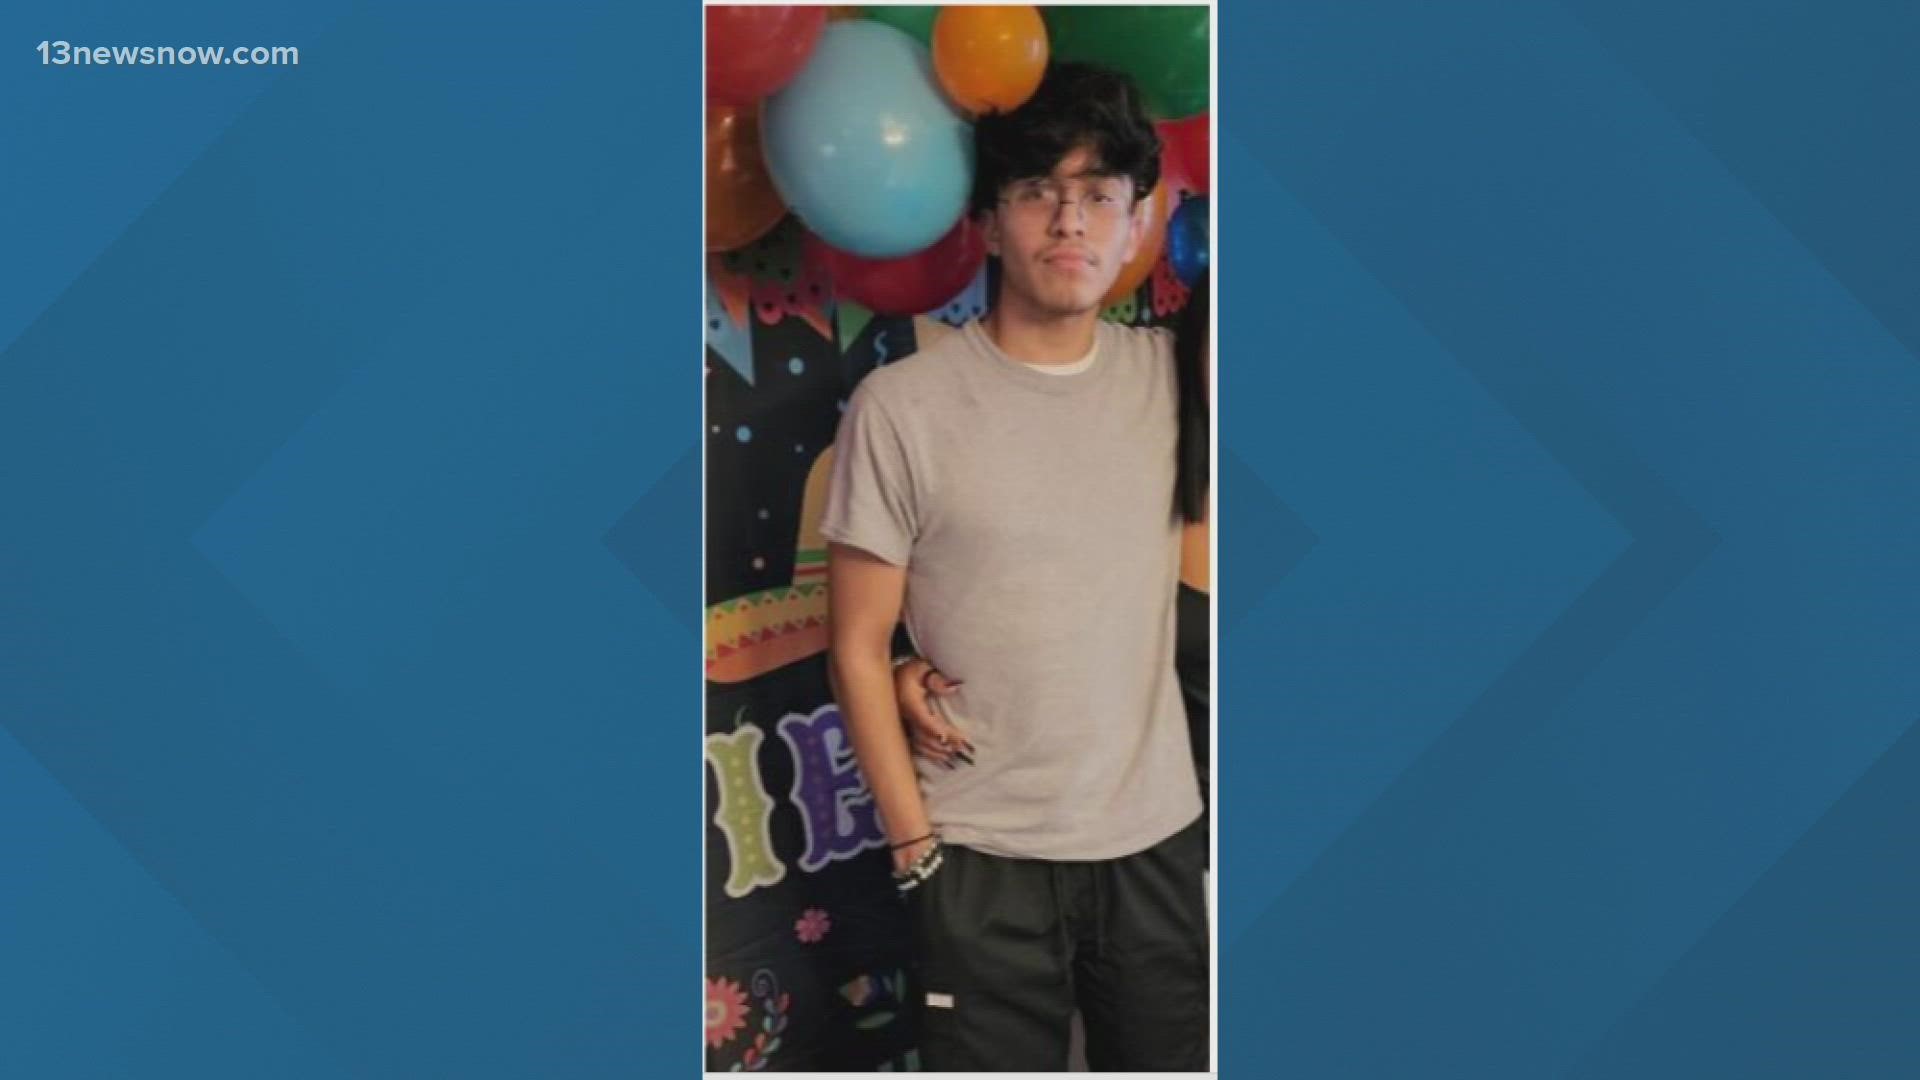 Fernando is also known as Jesus Chavez. He was among the six, and youngest, killed in the Chesapeake Walmart Supercenter shooting.